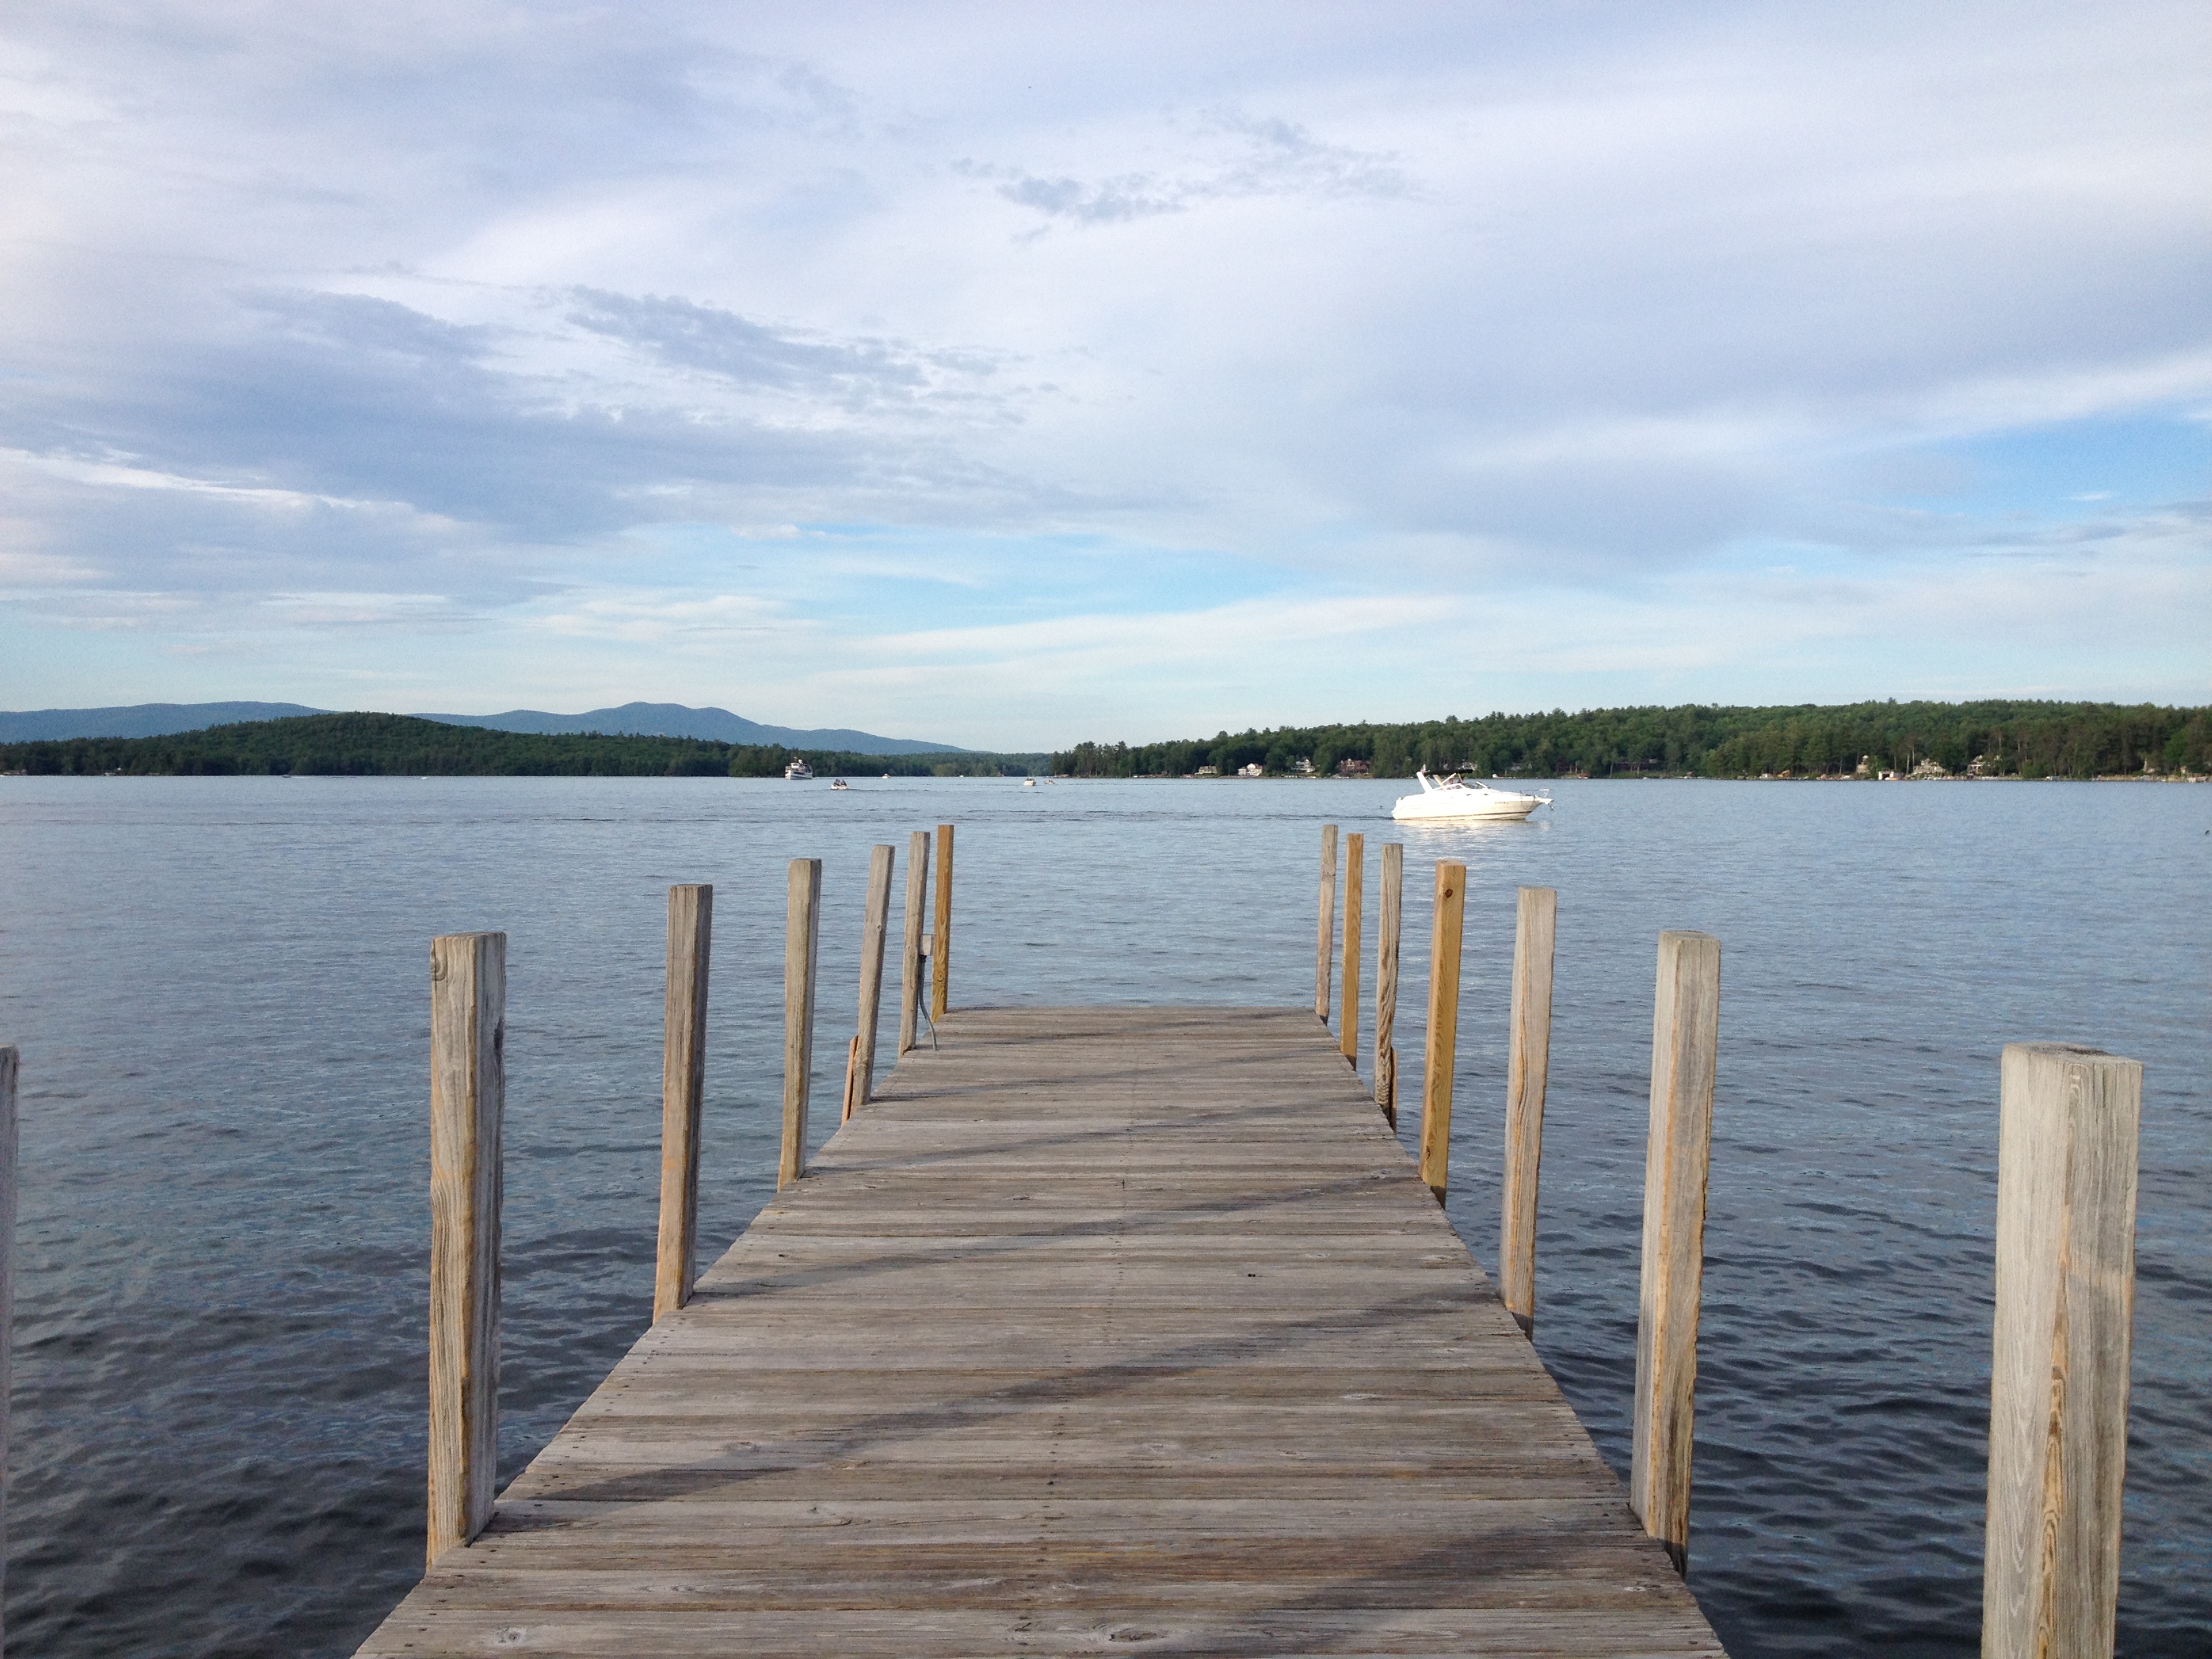 Photograph of a dock and water.